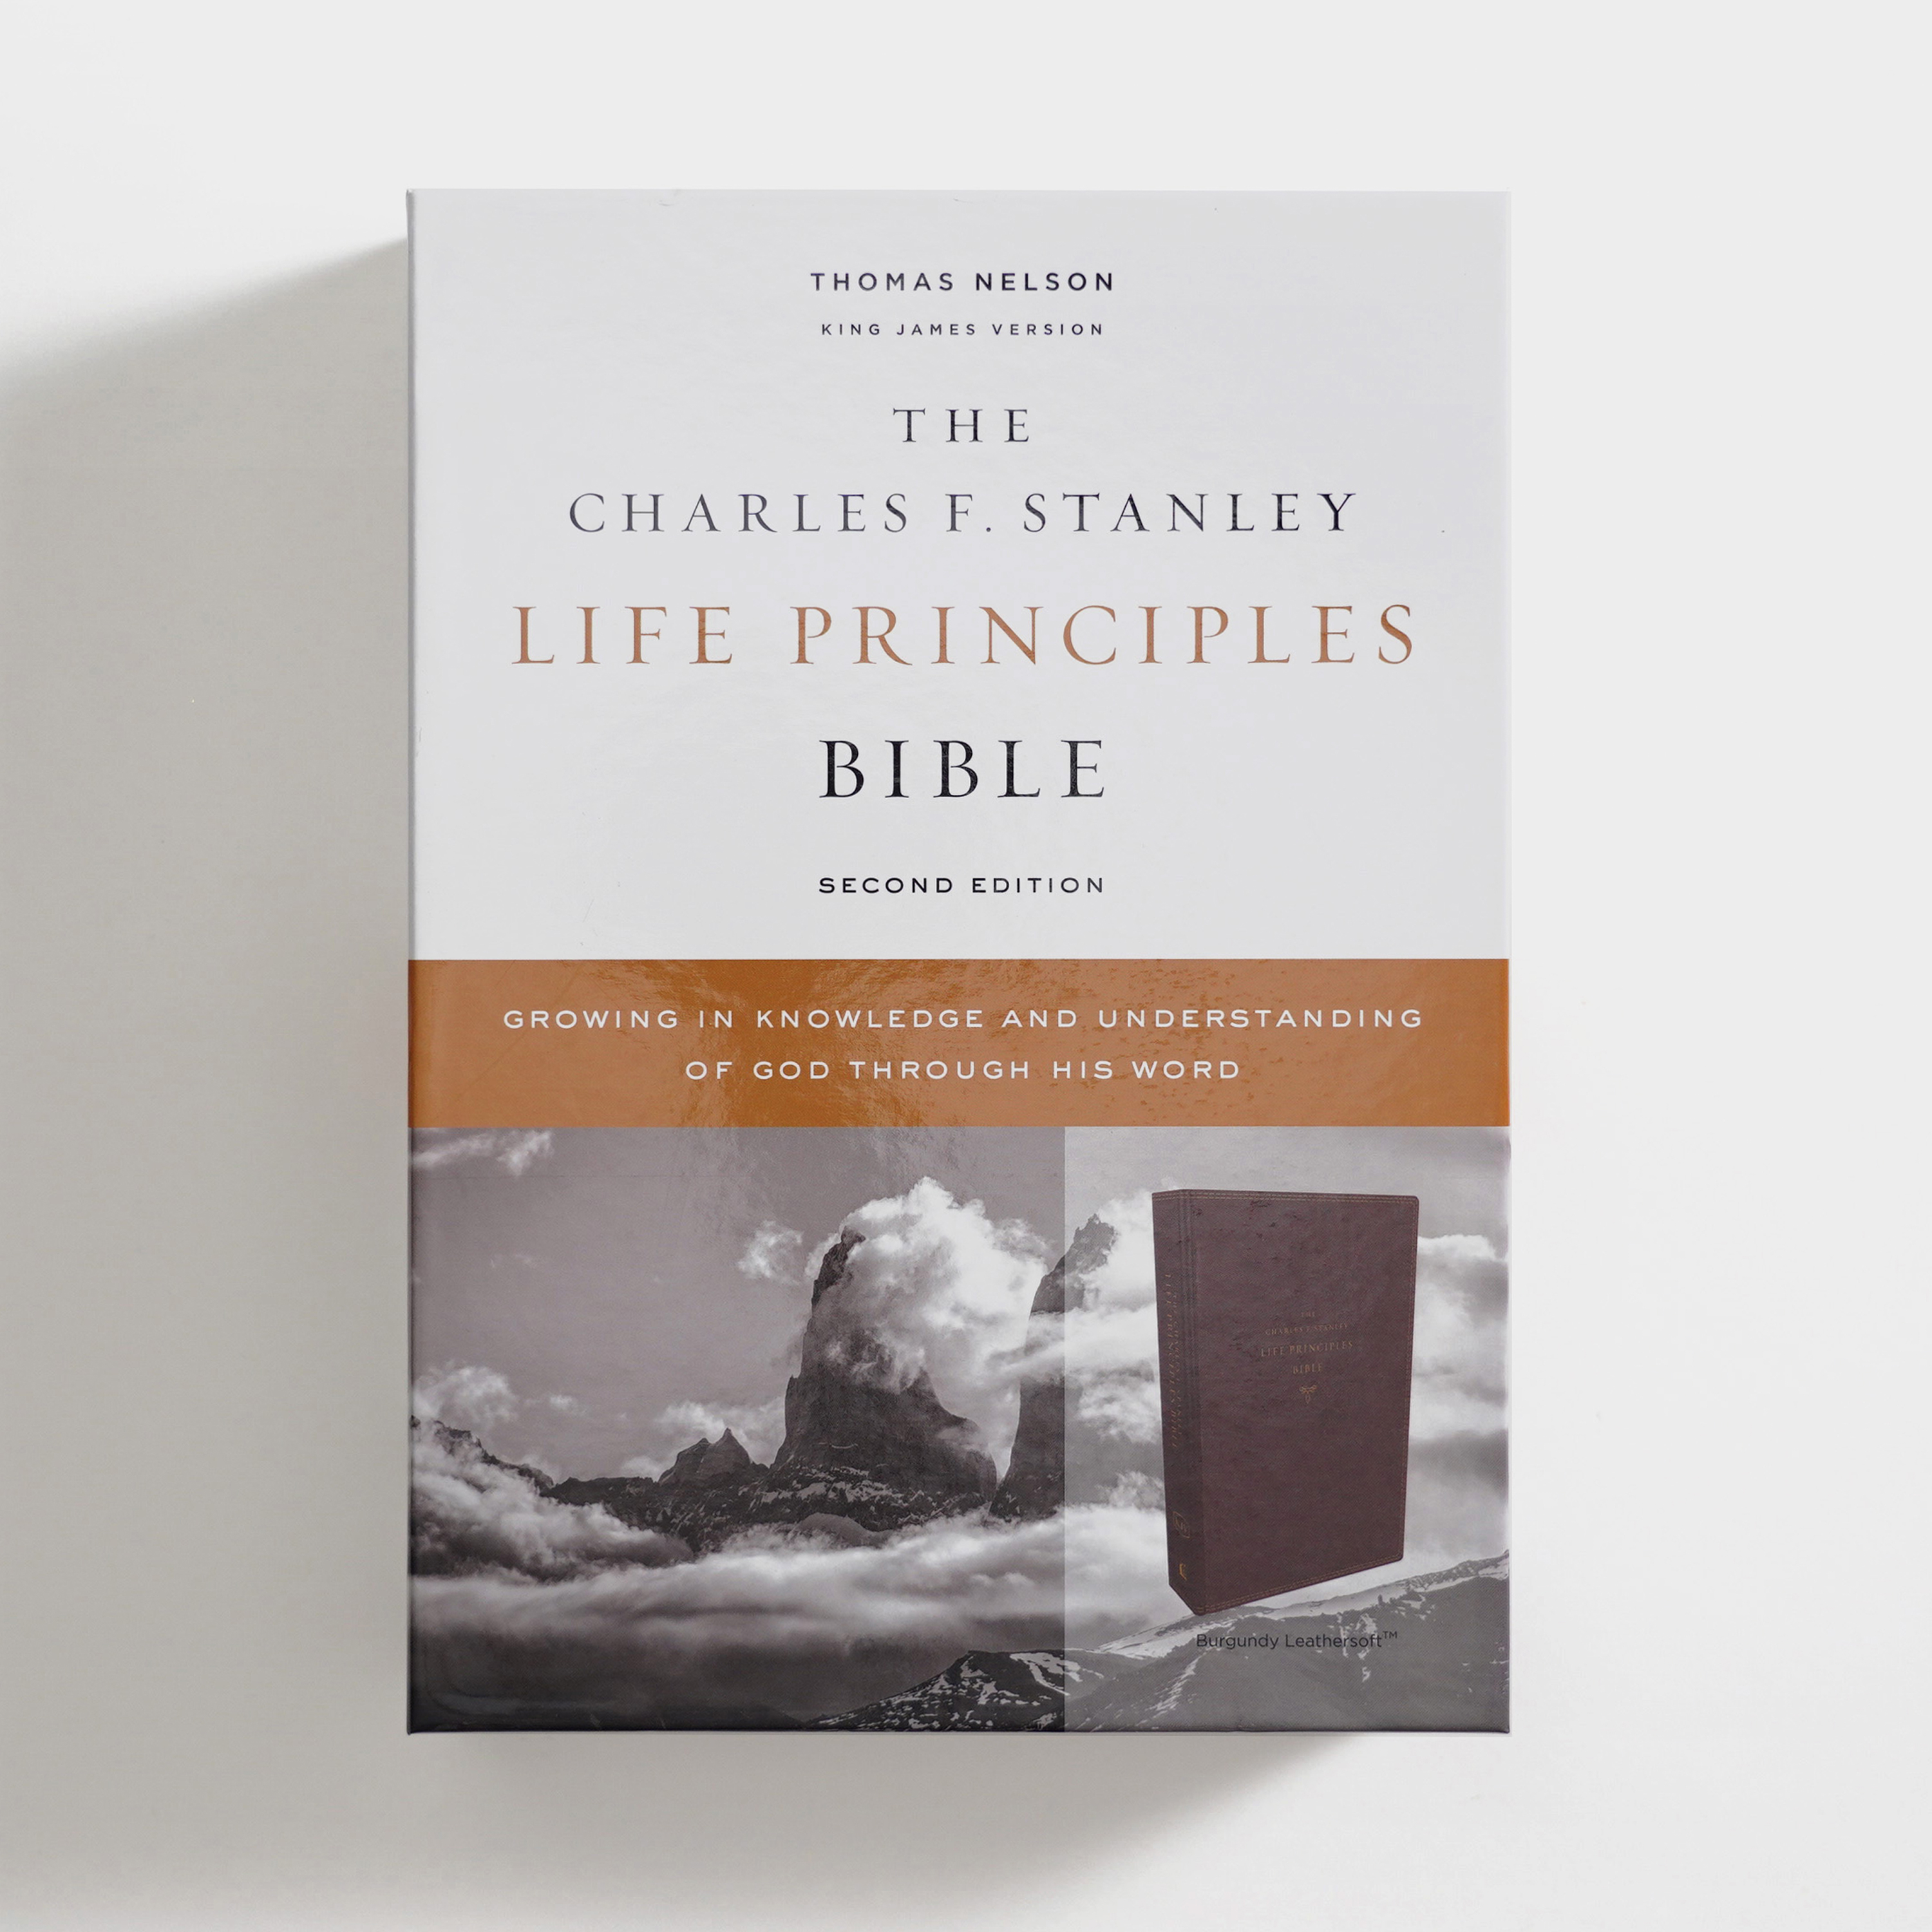 The Charles F. Stanley Life Principles Bible 2nd Edition, KJV - Burgundy Leathersoft